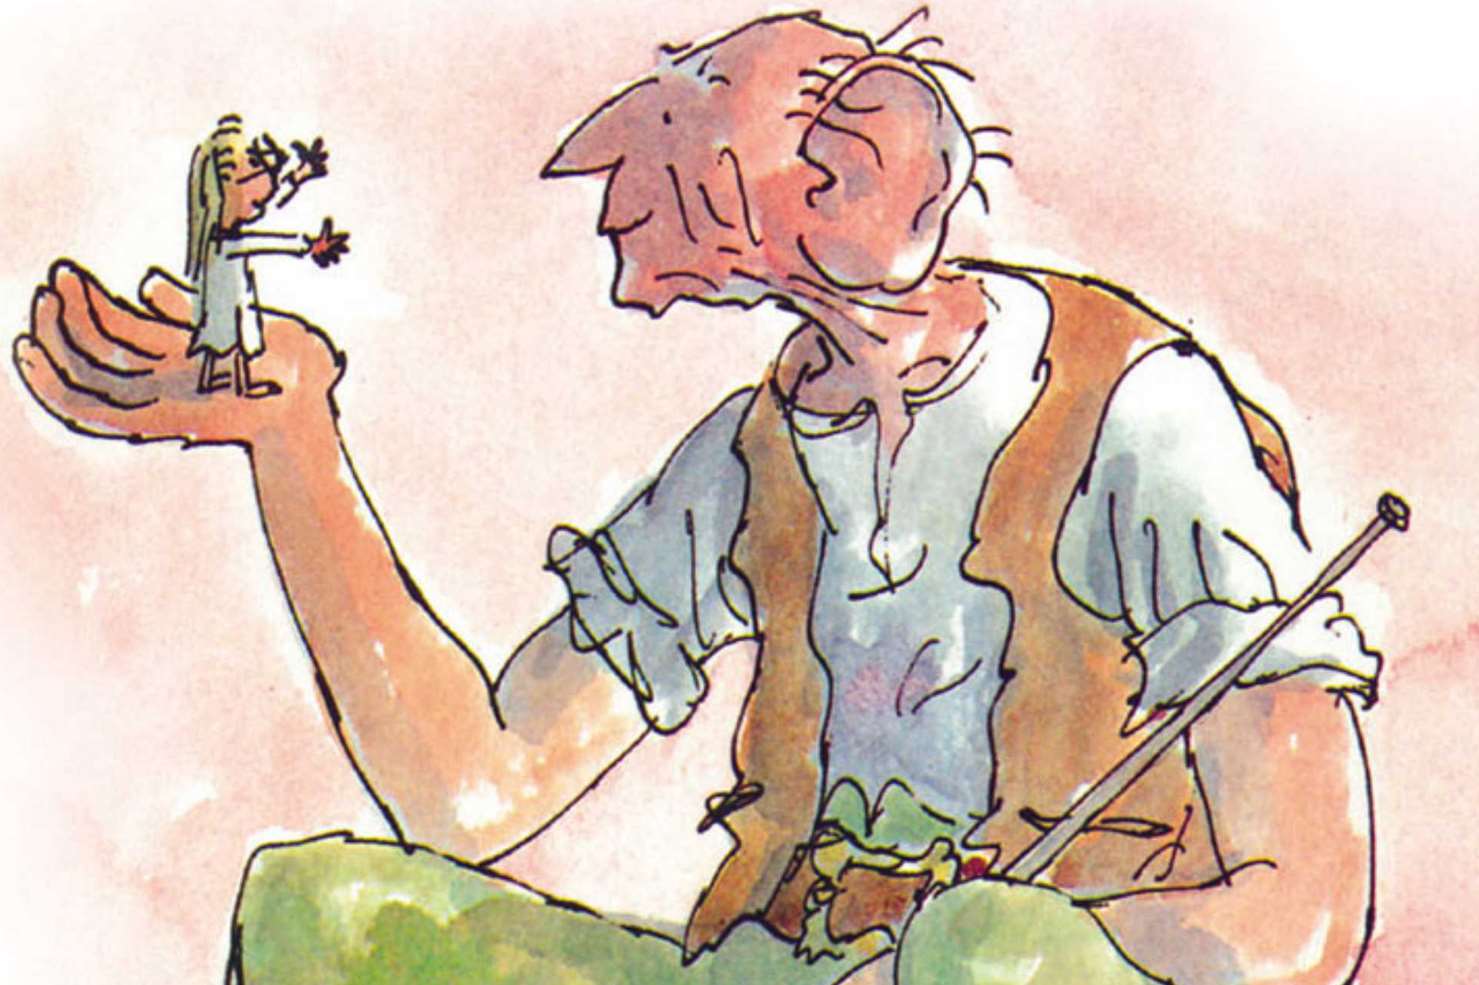 The BFG - Big Friendly Giant, one of Roald Dahl's much-loved stories